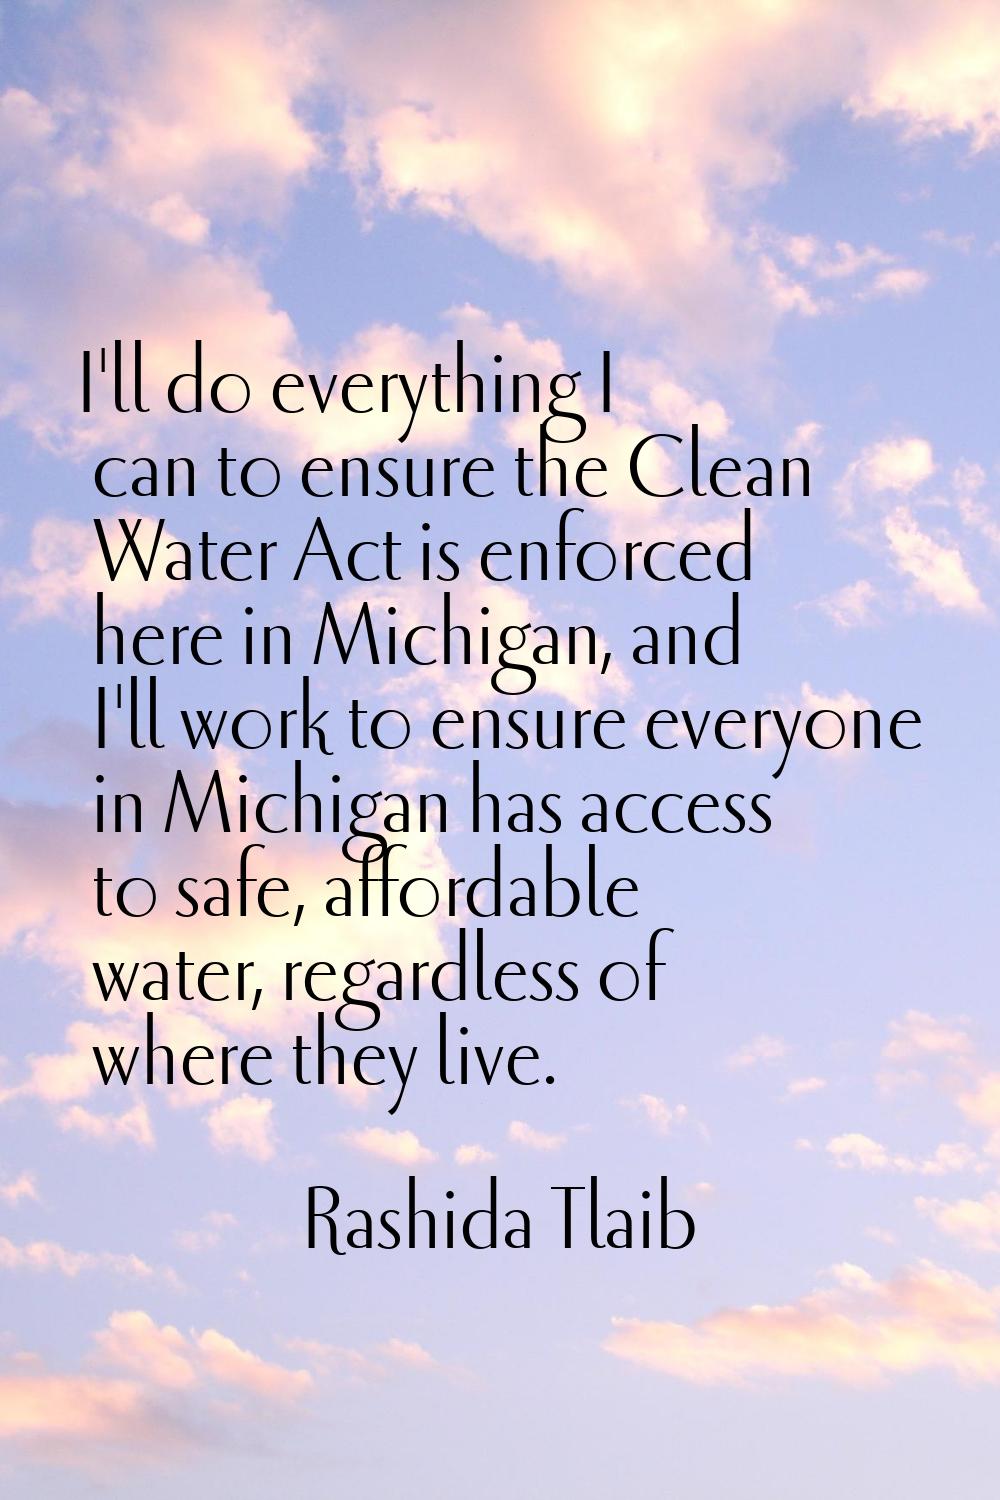 I'll do everything I can to ensure the Clean Water Act is enforced here in Michigan, and I'll work 